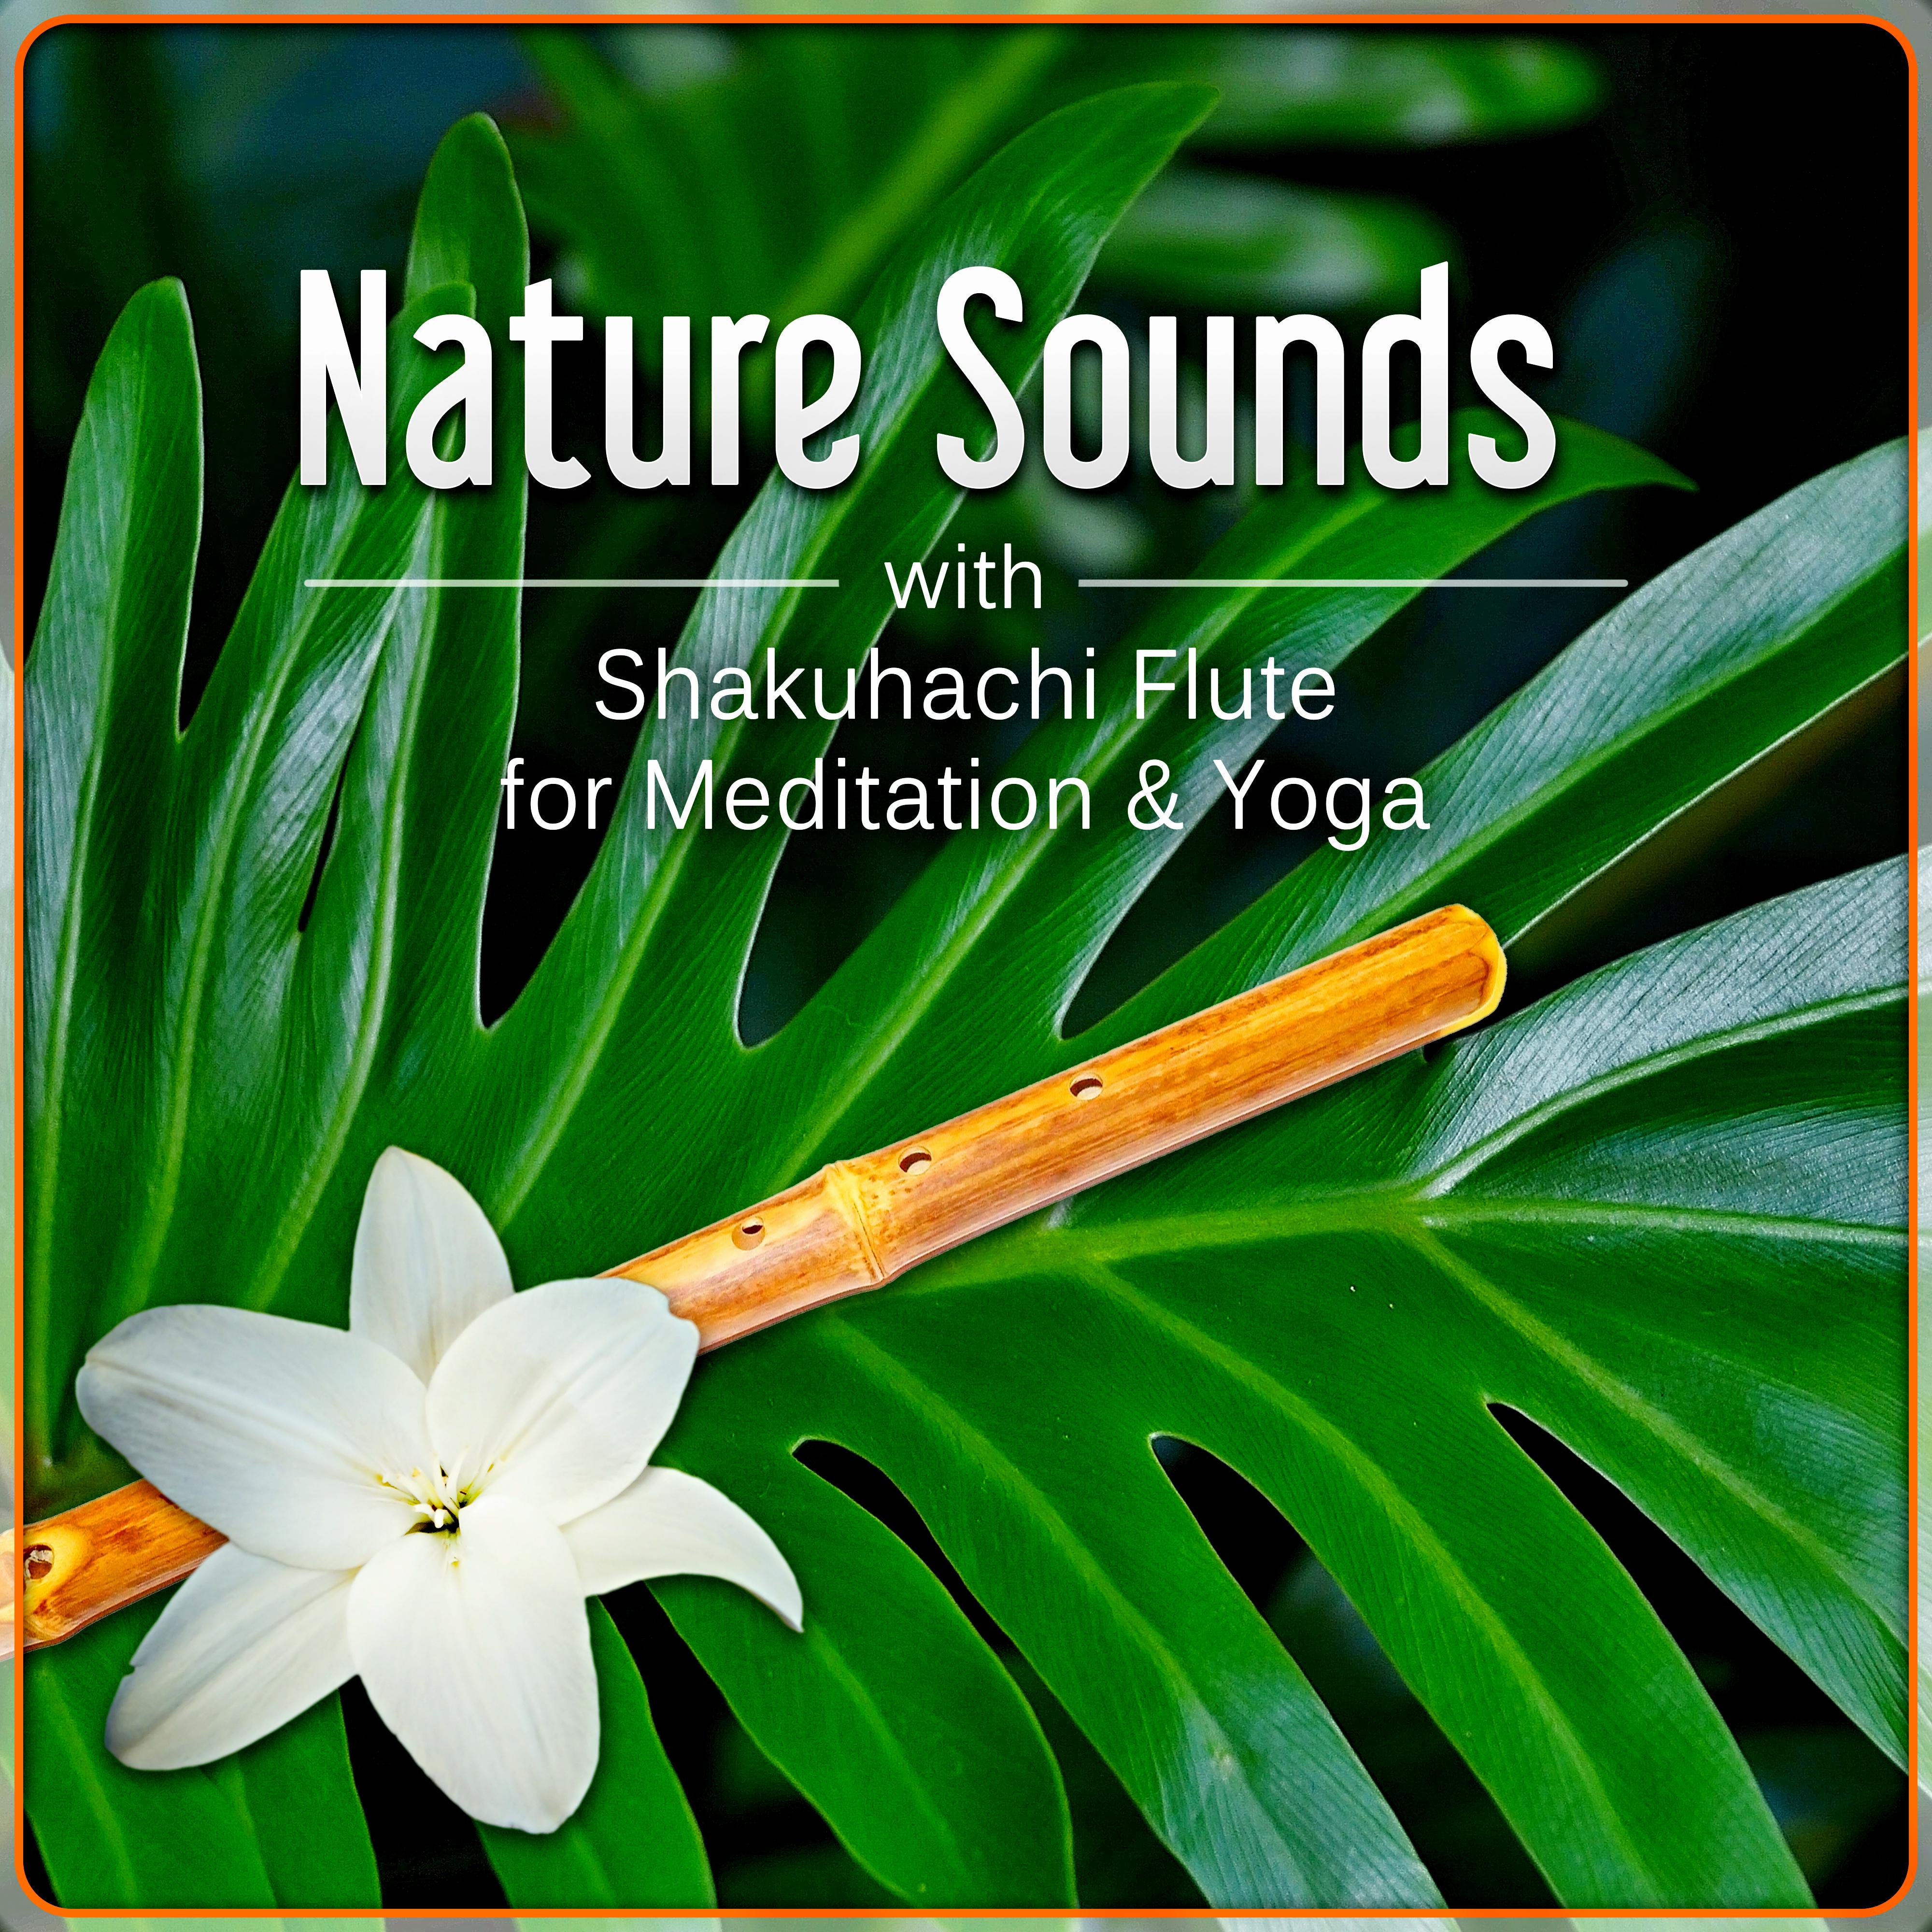 Nature Sounds with Shakuhachi Flute for Meditation  Yoga  The Ultimate Ambient Zen Flute Music for Relax and Stress Management